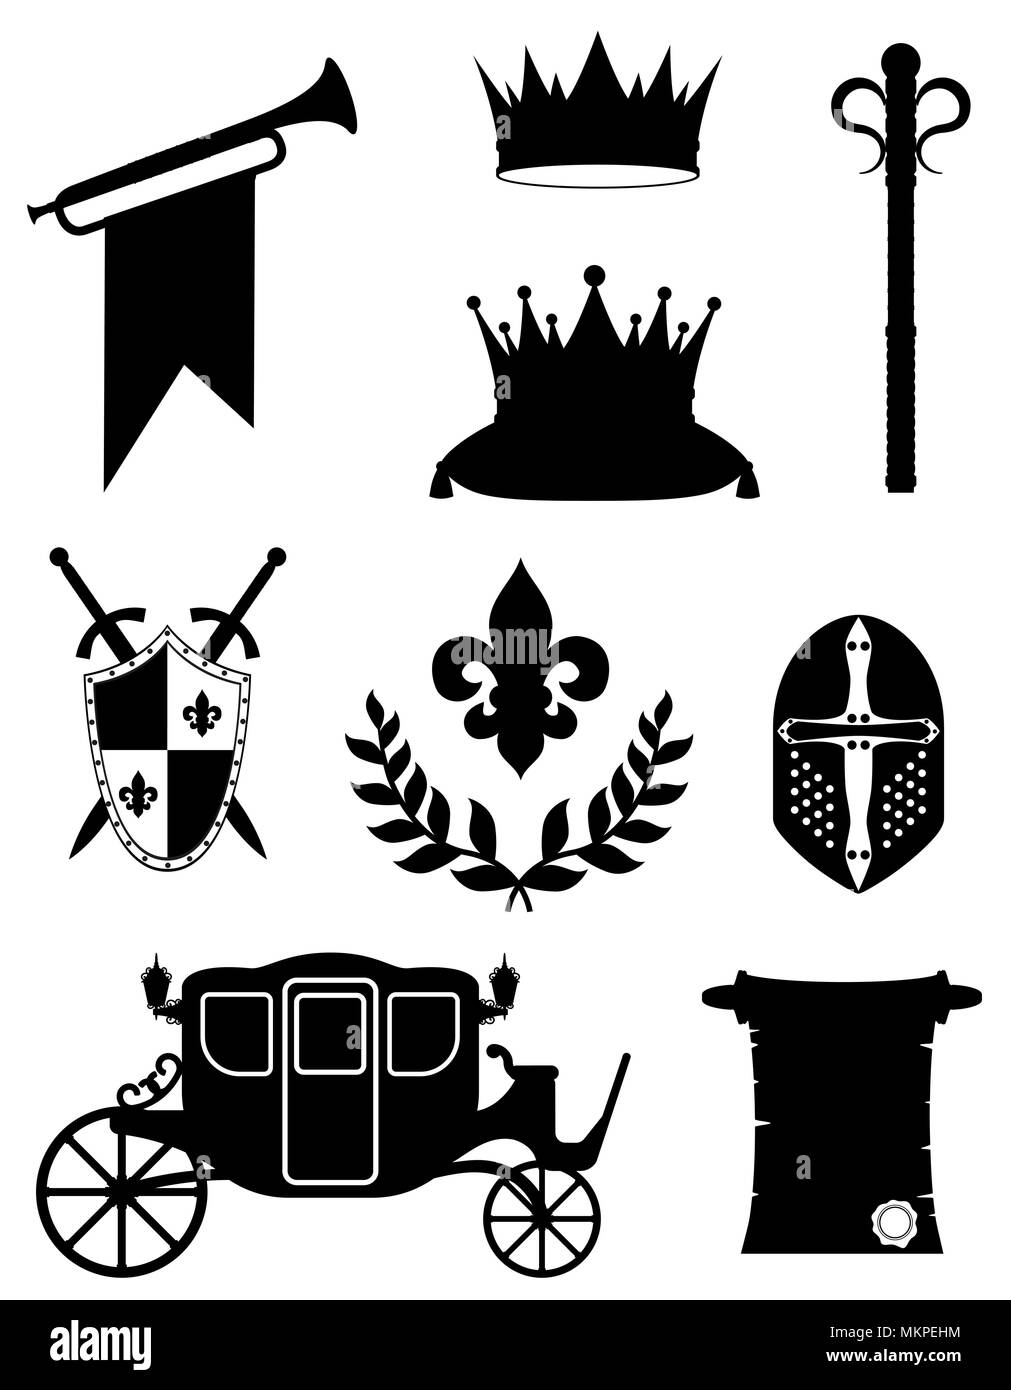 king royal golden attributes of medieval power black outline silhouette vector illustration isolated on white background Stock Vector